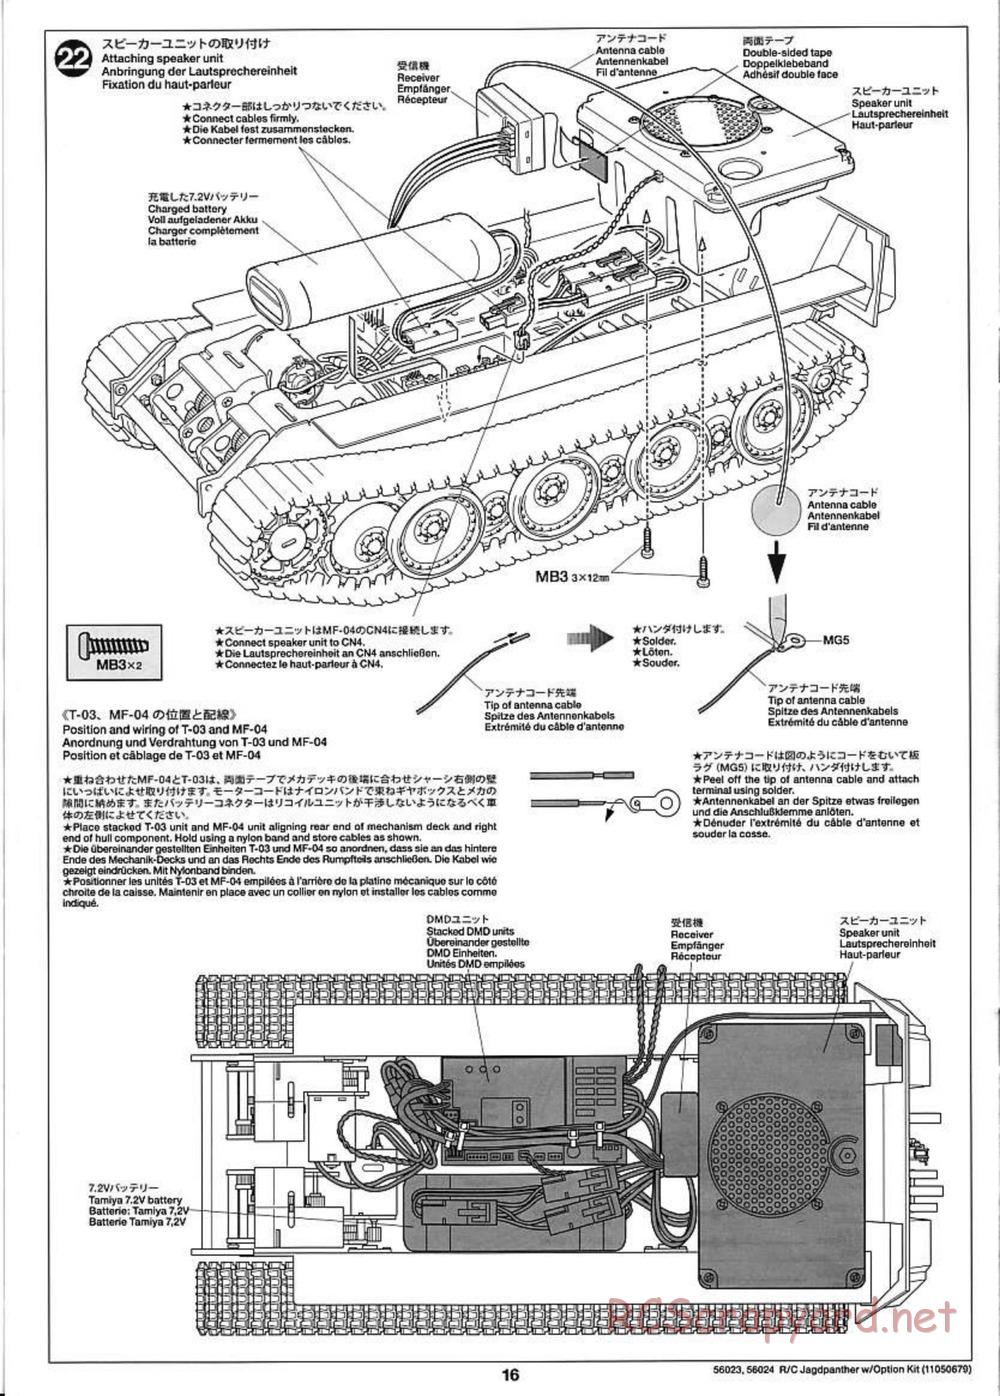 Tamiya - Jagdpanther - 1/16 Scale Chassis - Manual - Page 16